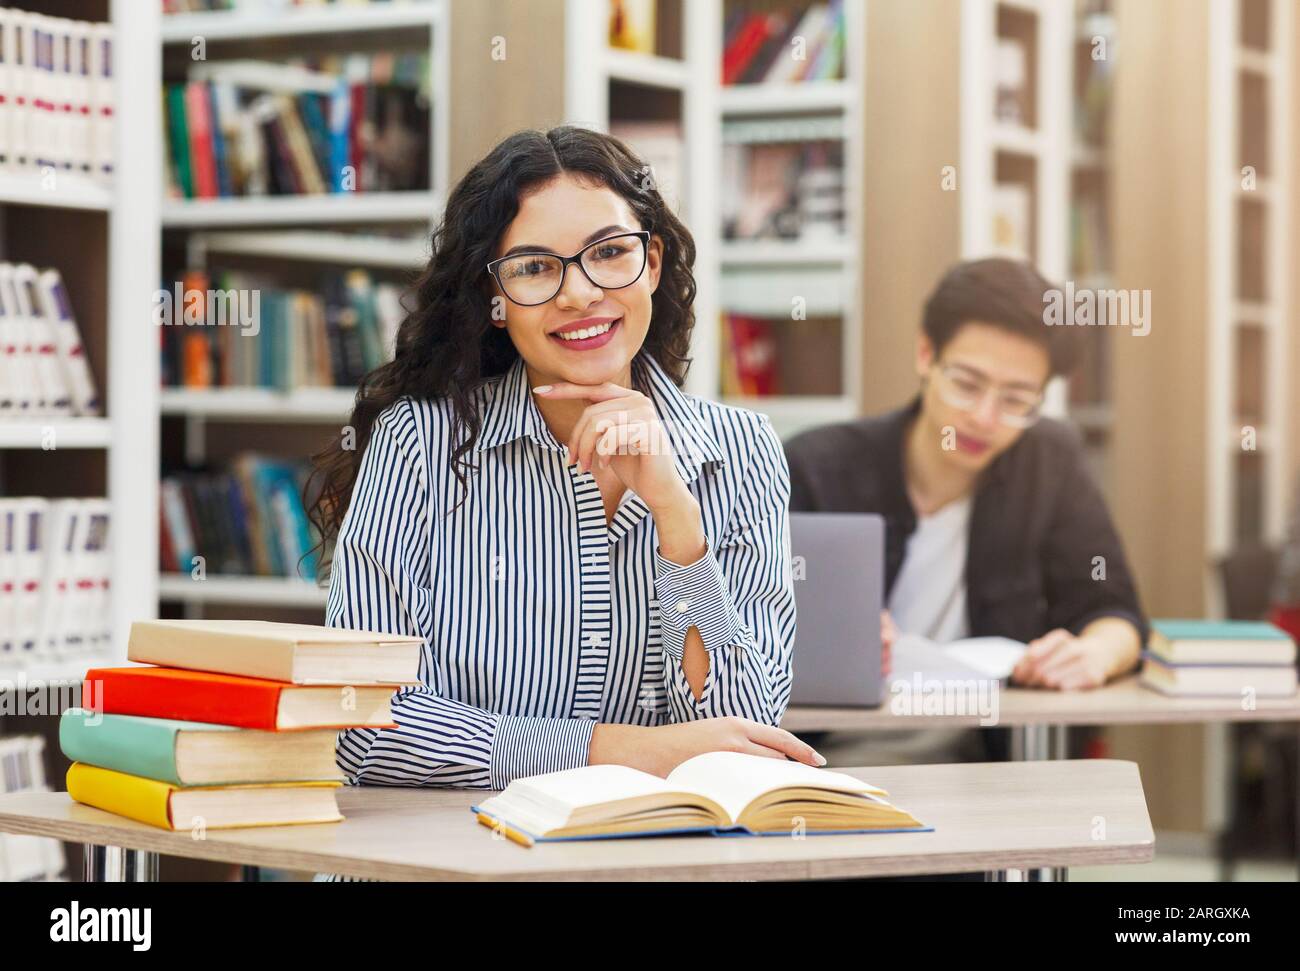 Cheerful latina girl sitting at desk in library Stock Photo